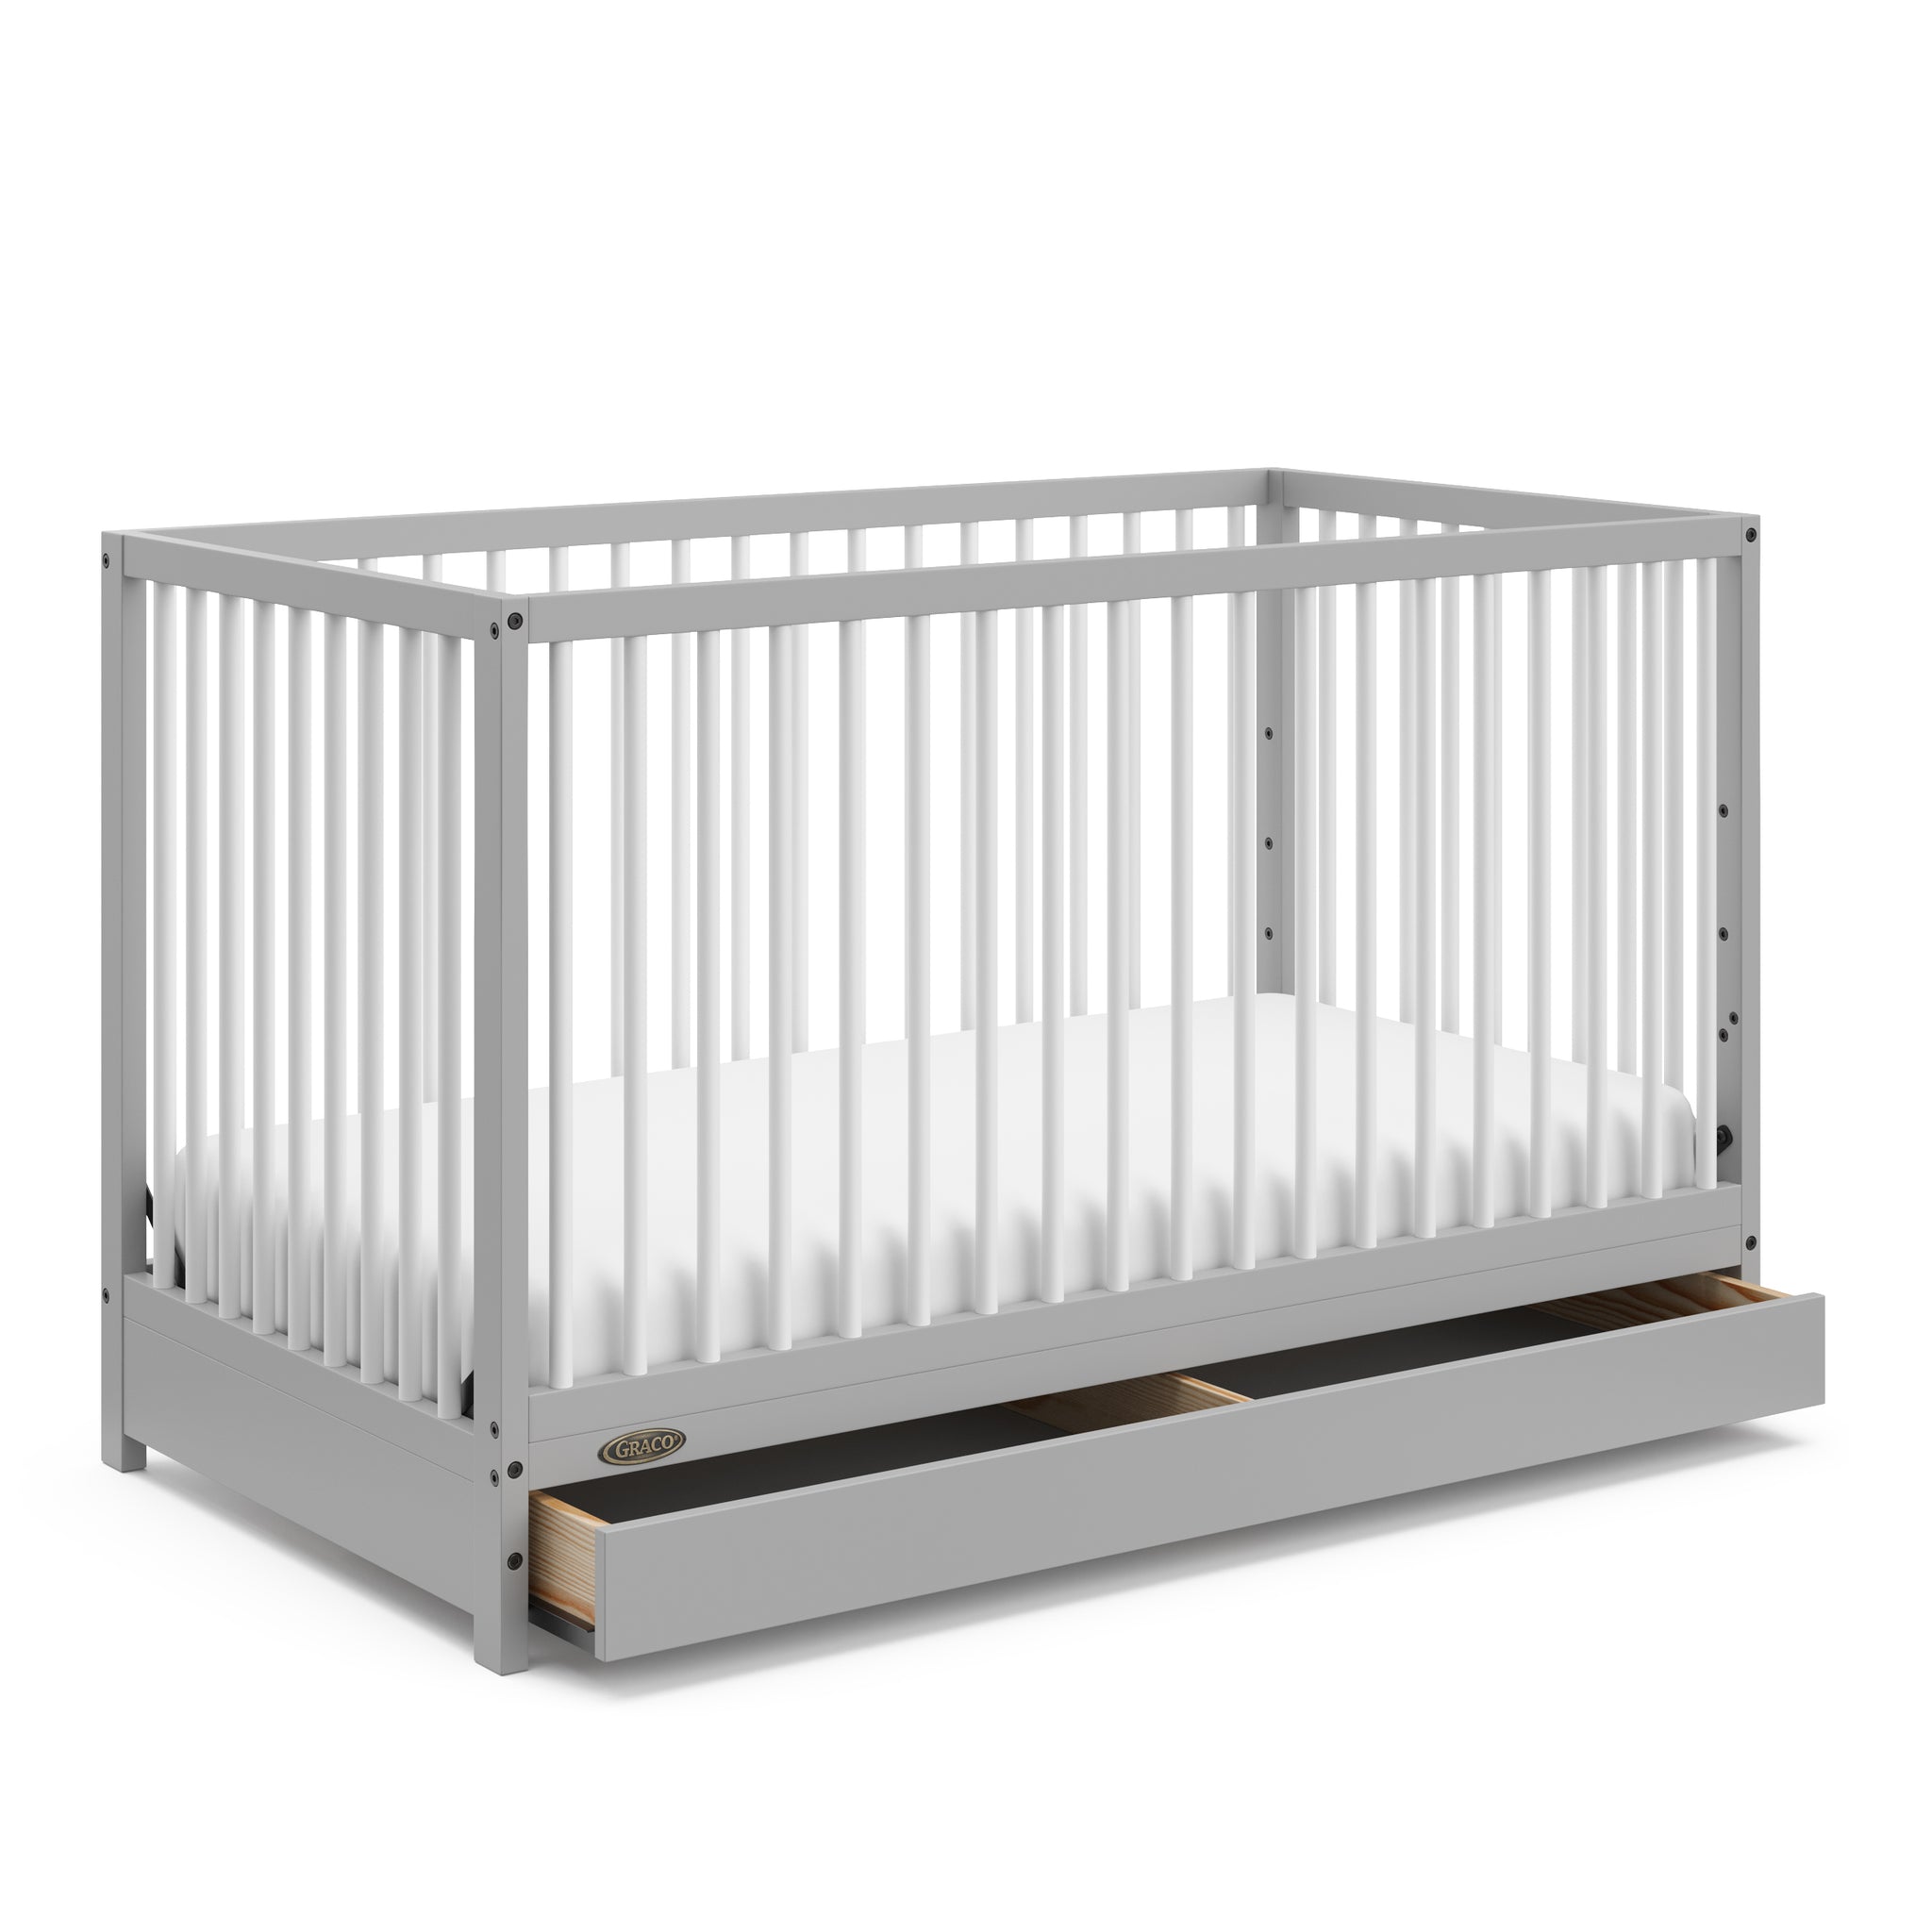 Pebble gray with white crib with open drawer 